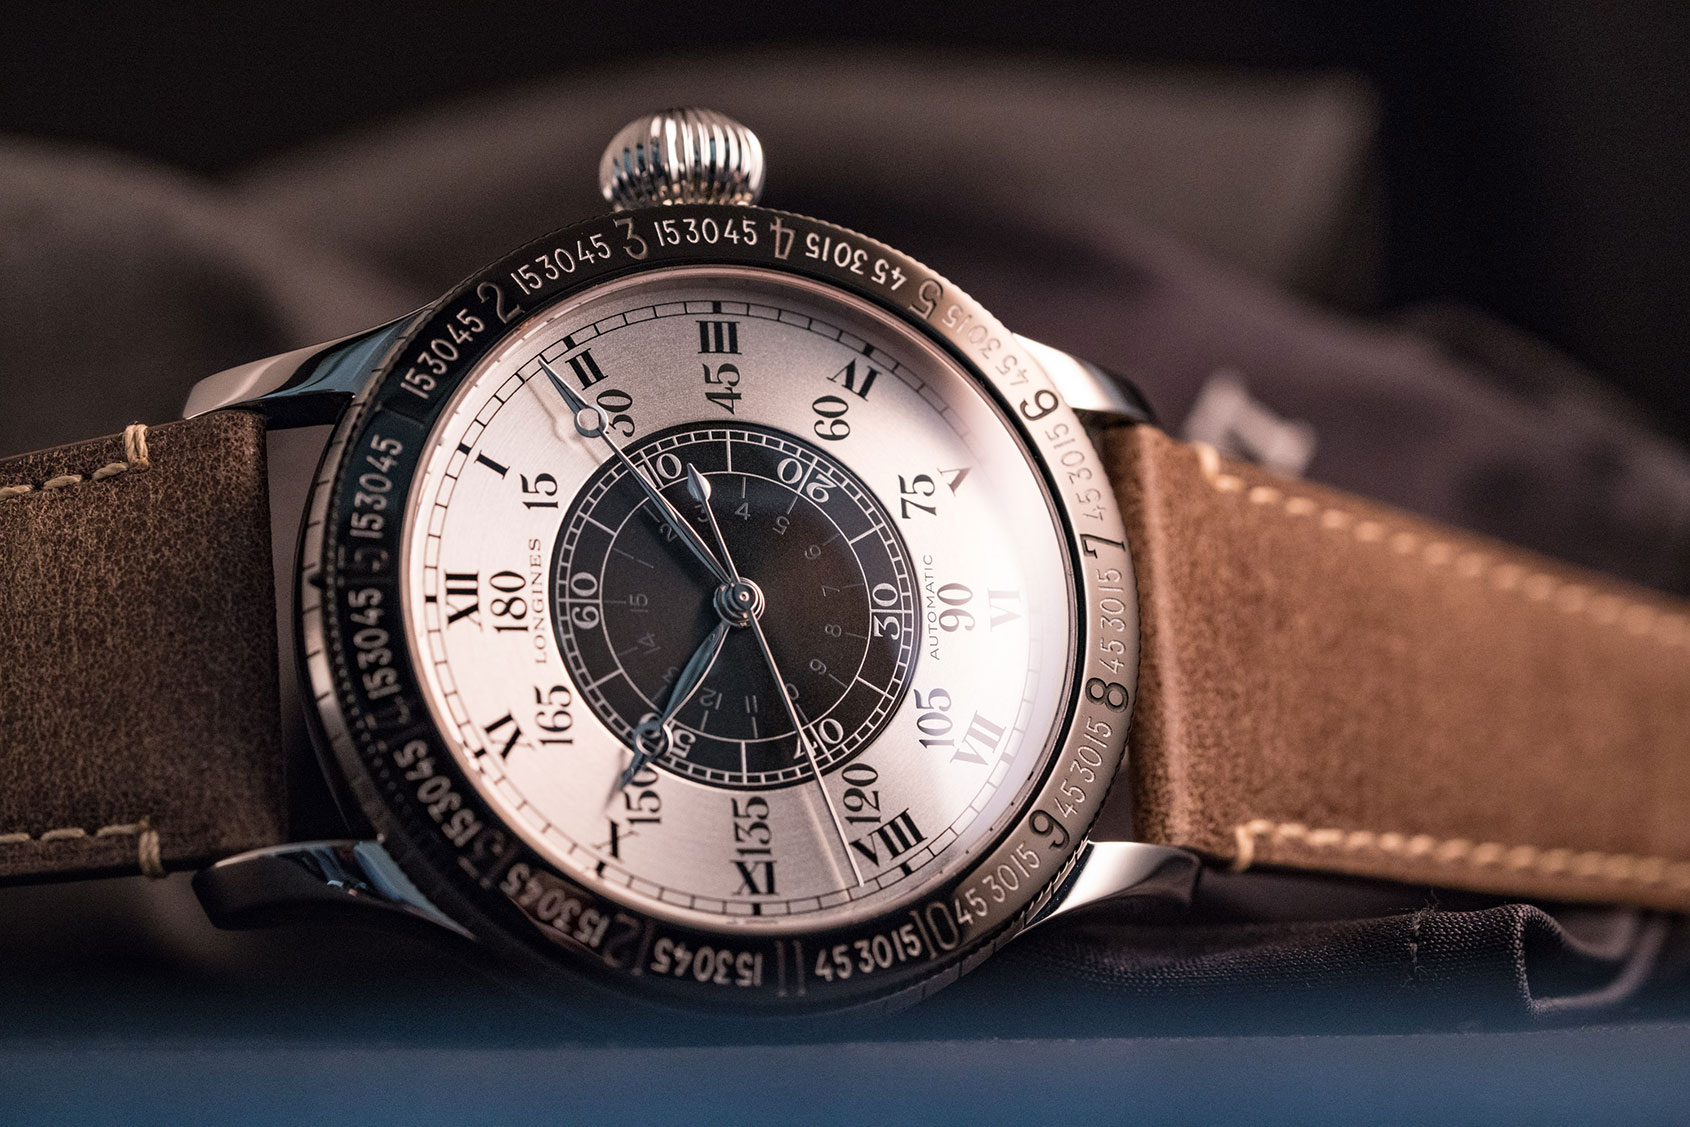 https://timeandtidewatches.com/wp-content/uploads/2017/03/Longines-Lindbergh-Hour-Angle-Watch-90th-Anniversary-1.jpg